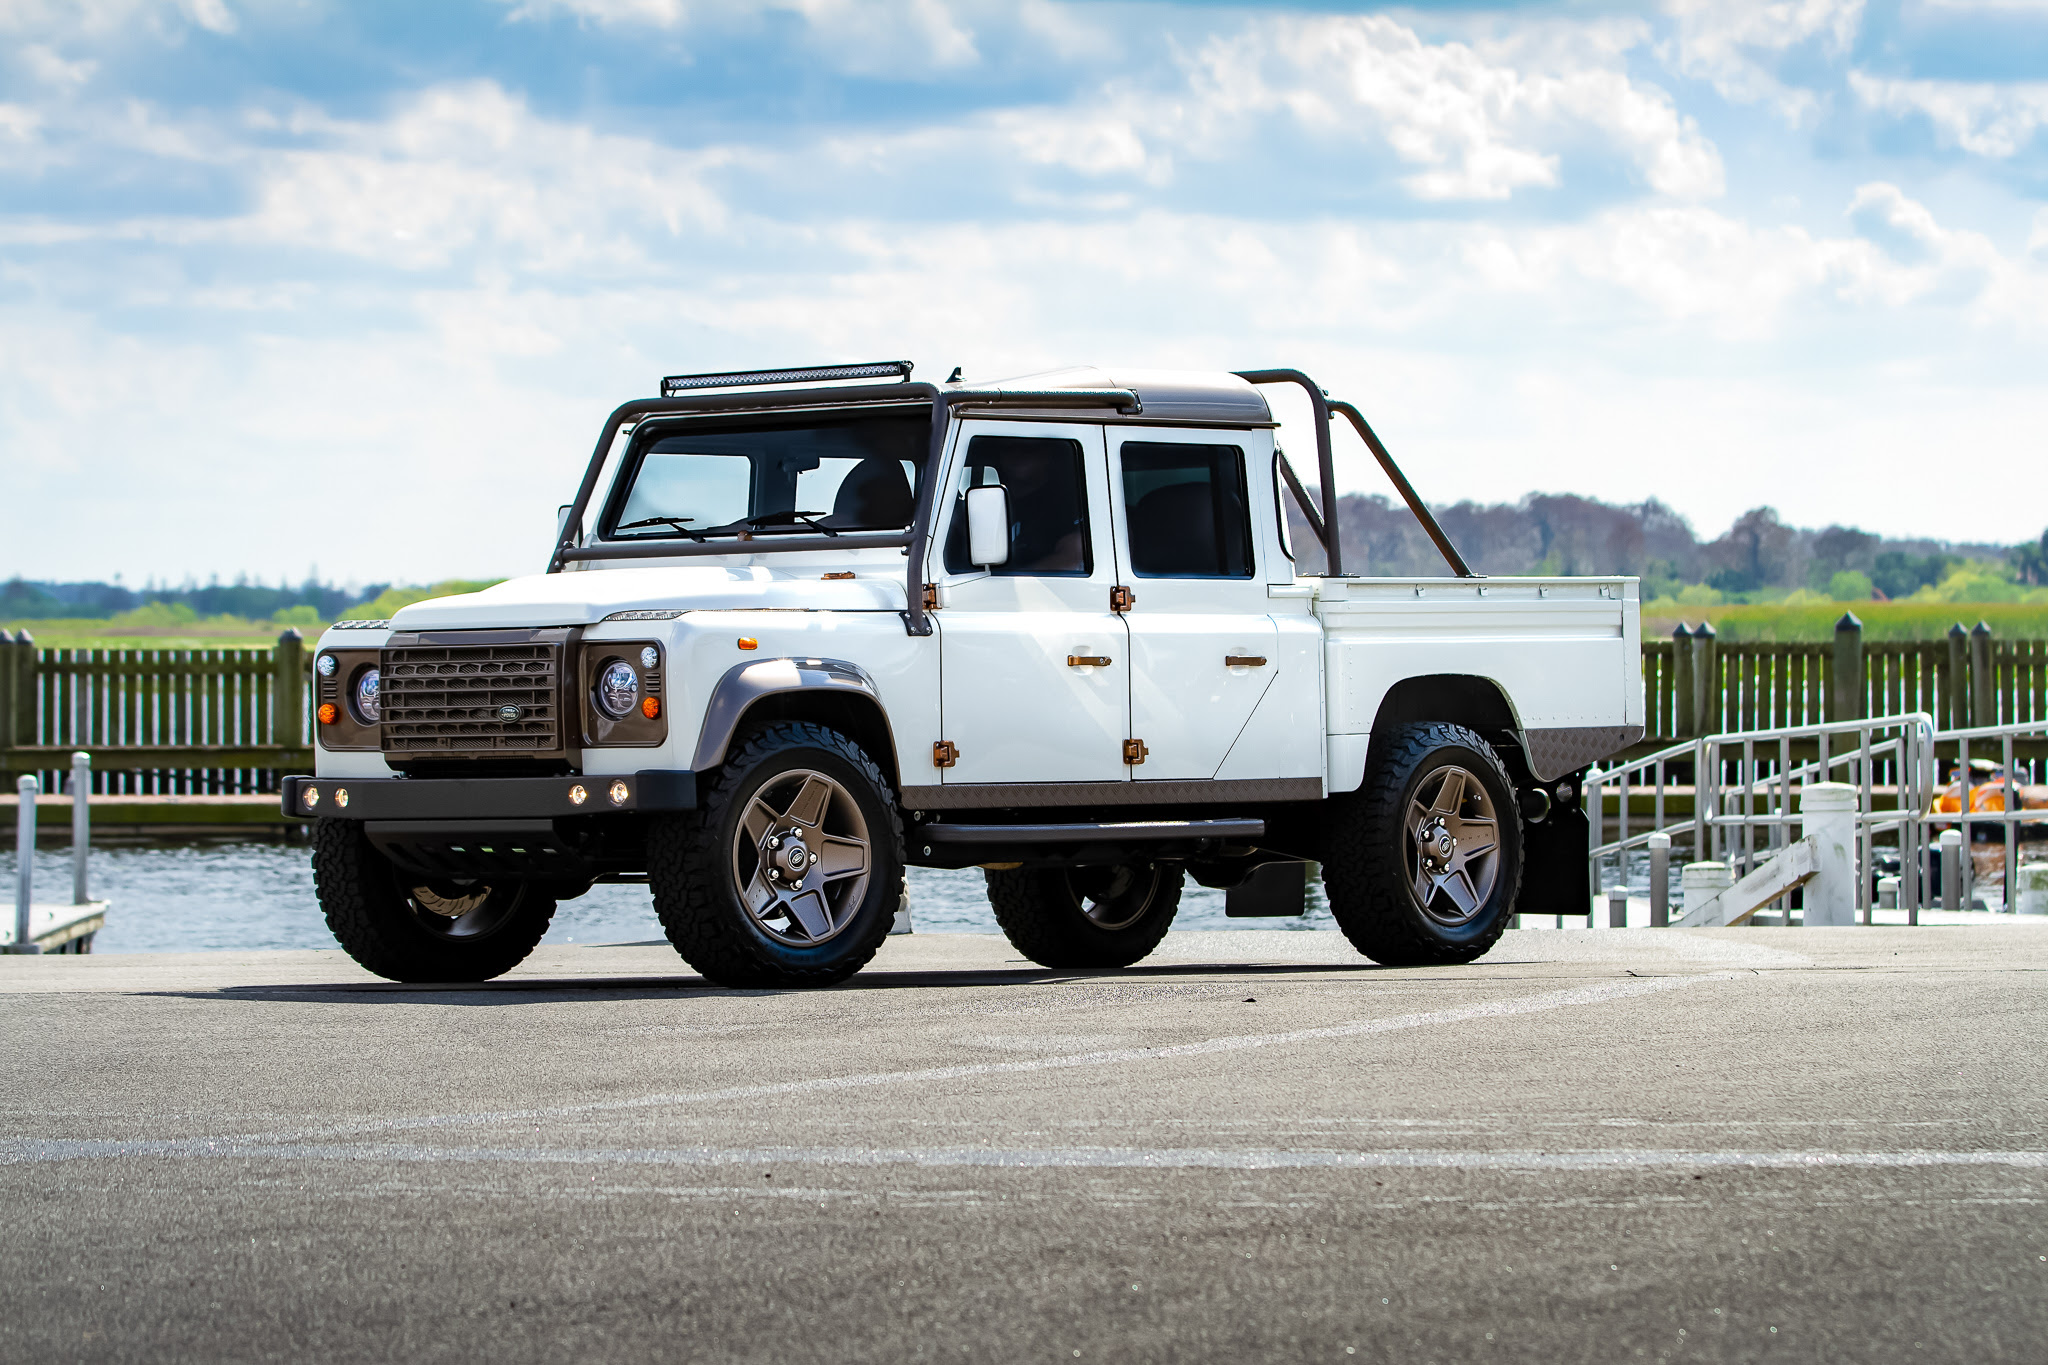 No-Limits Build Revealed by E.C.D. Automotive Design is a Custom Defender 130, the Epitome of Opulence on an Off-Road Legend